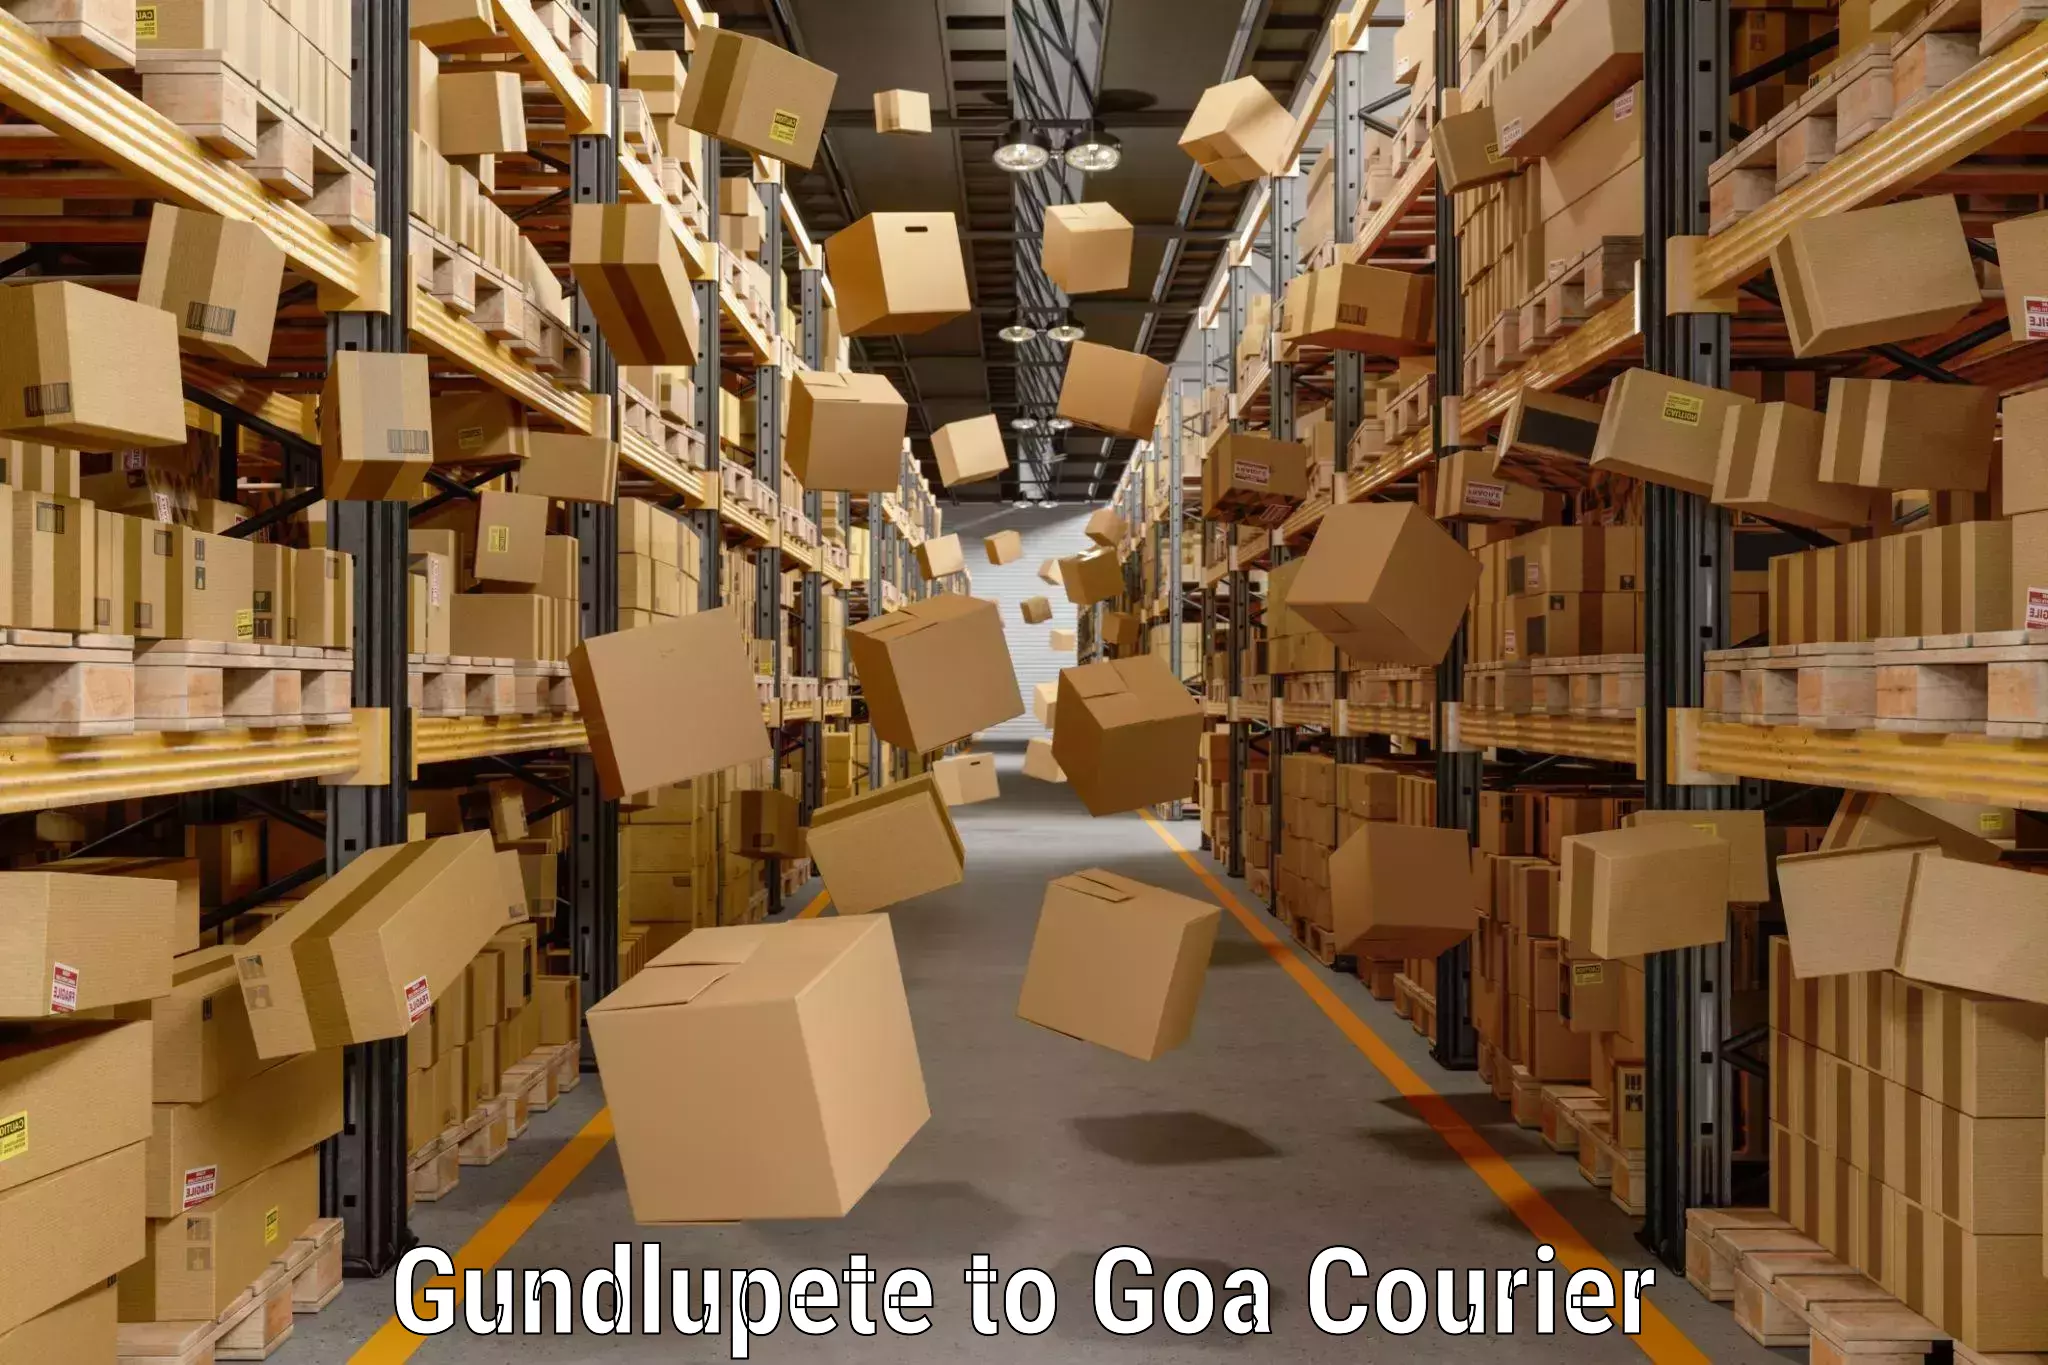 Luggage transport consulting Gundlupete to Goa